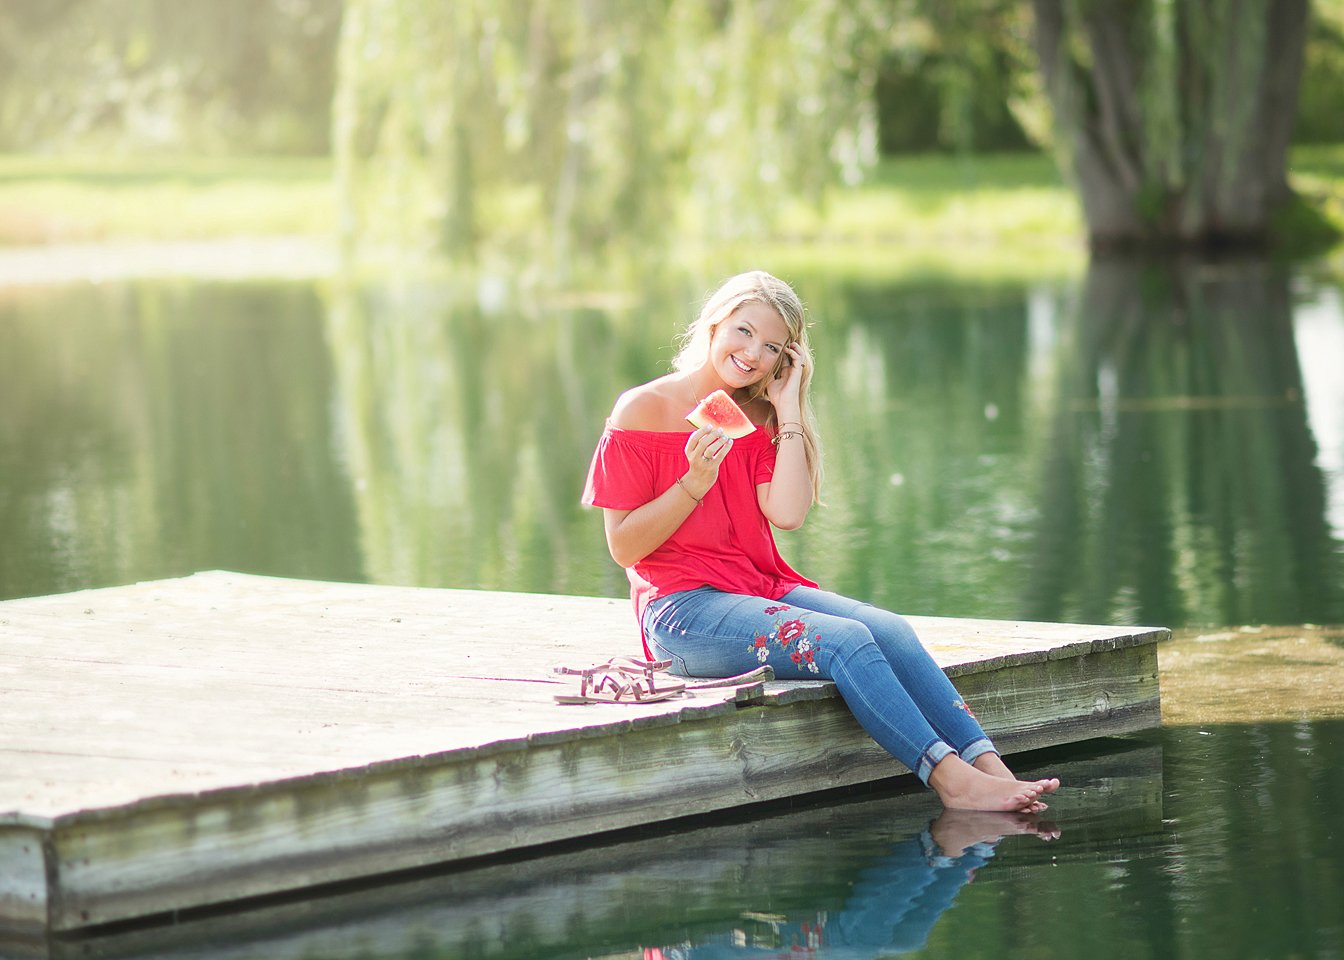 Lady Brio Photography Marysville Ohio Senior Pictures Water Dock Weeping Willow Red Shirt.jpg